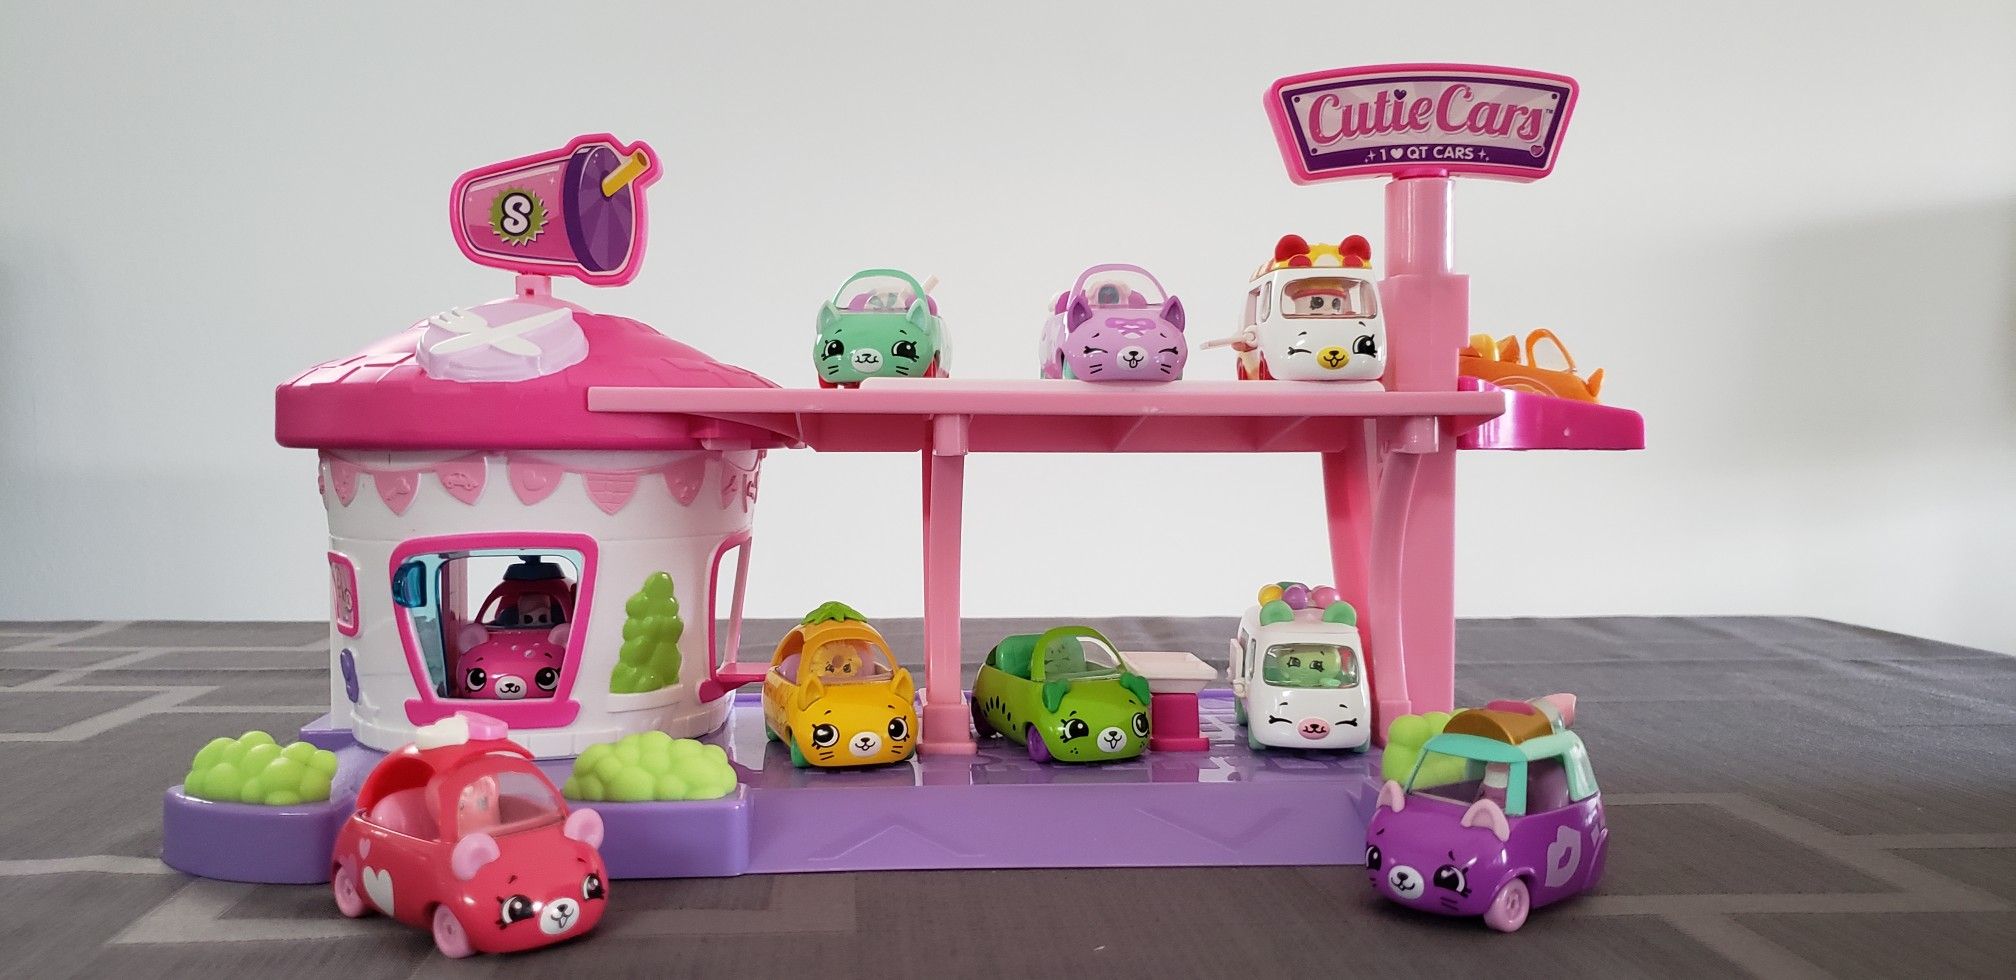 Cutie Cars Shopkins Drive Thru Diner Playset and Cars